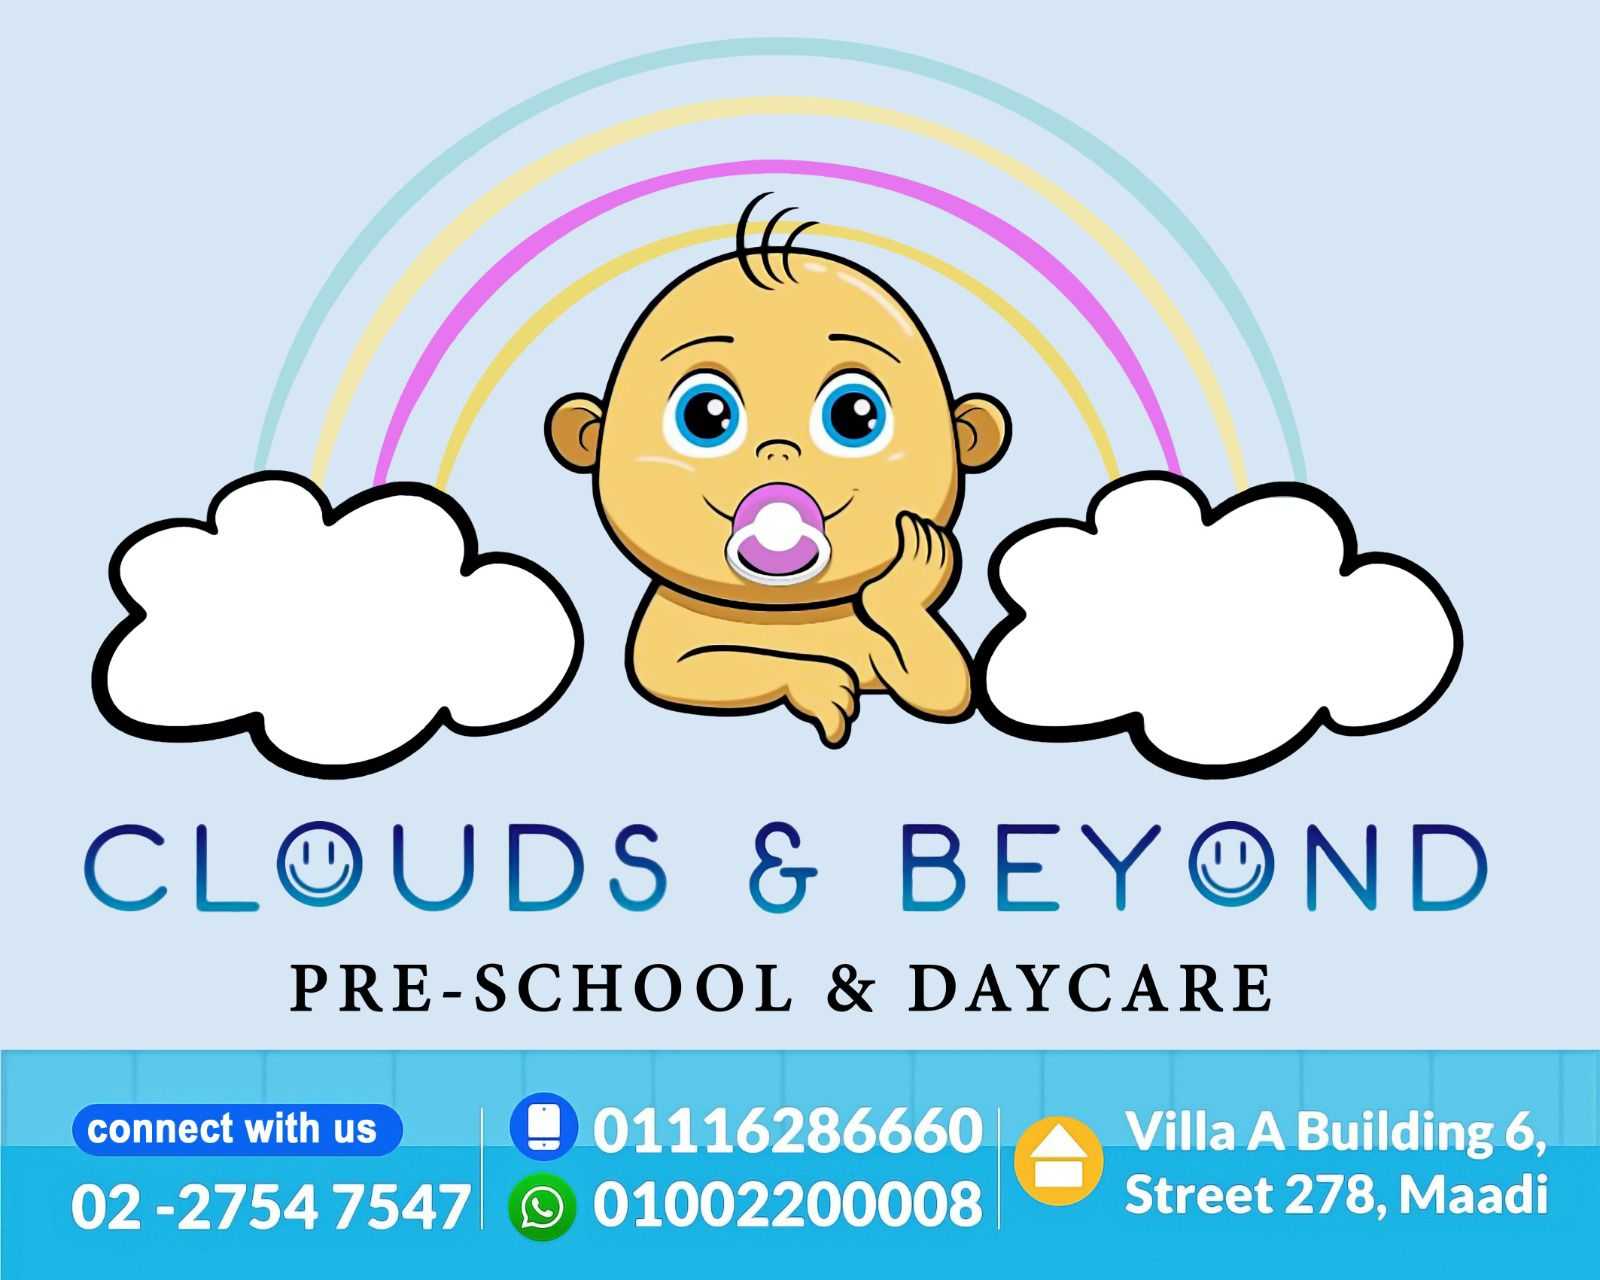 Clouds & Beyond Pre-School & Daycare